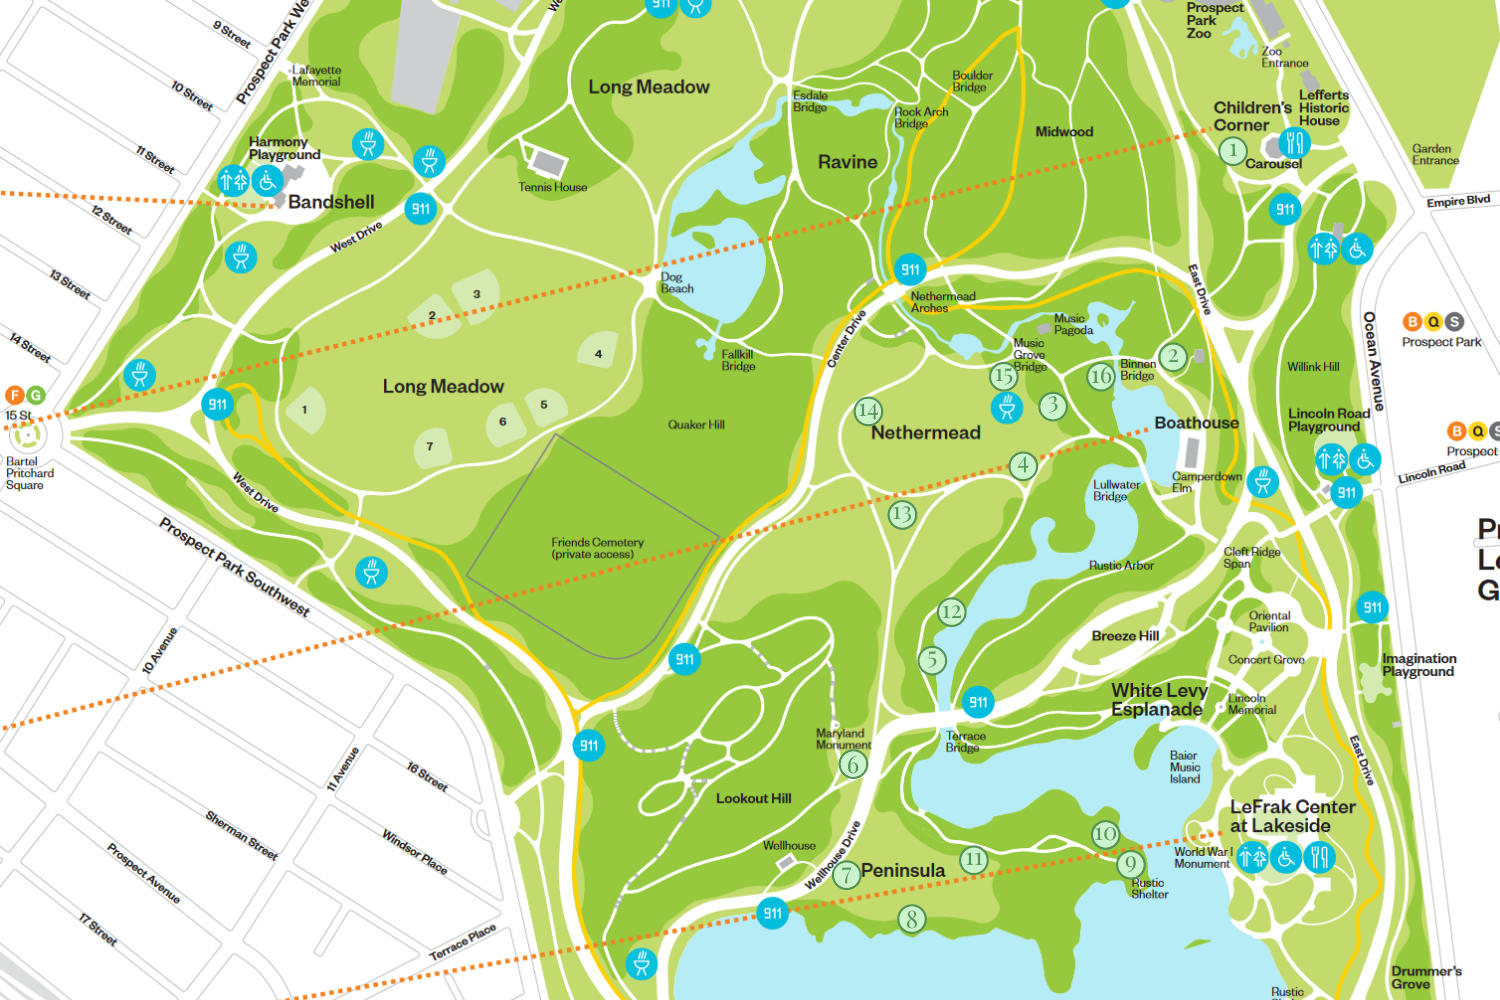 Map of Prospect Park with reading spots labeled.